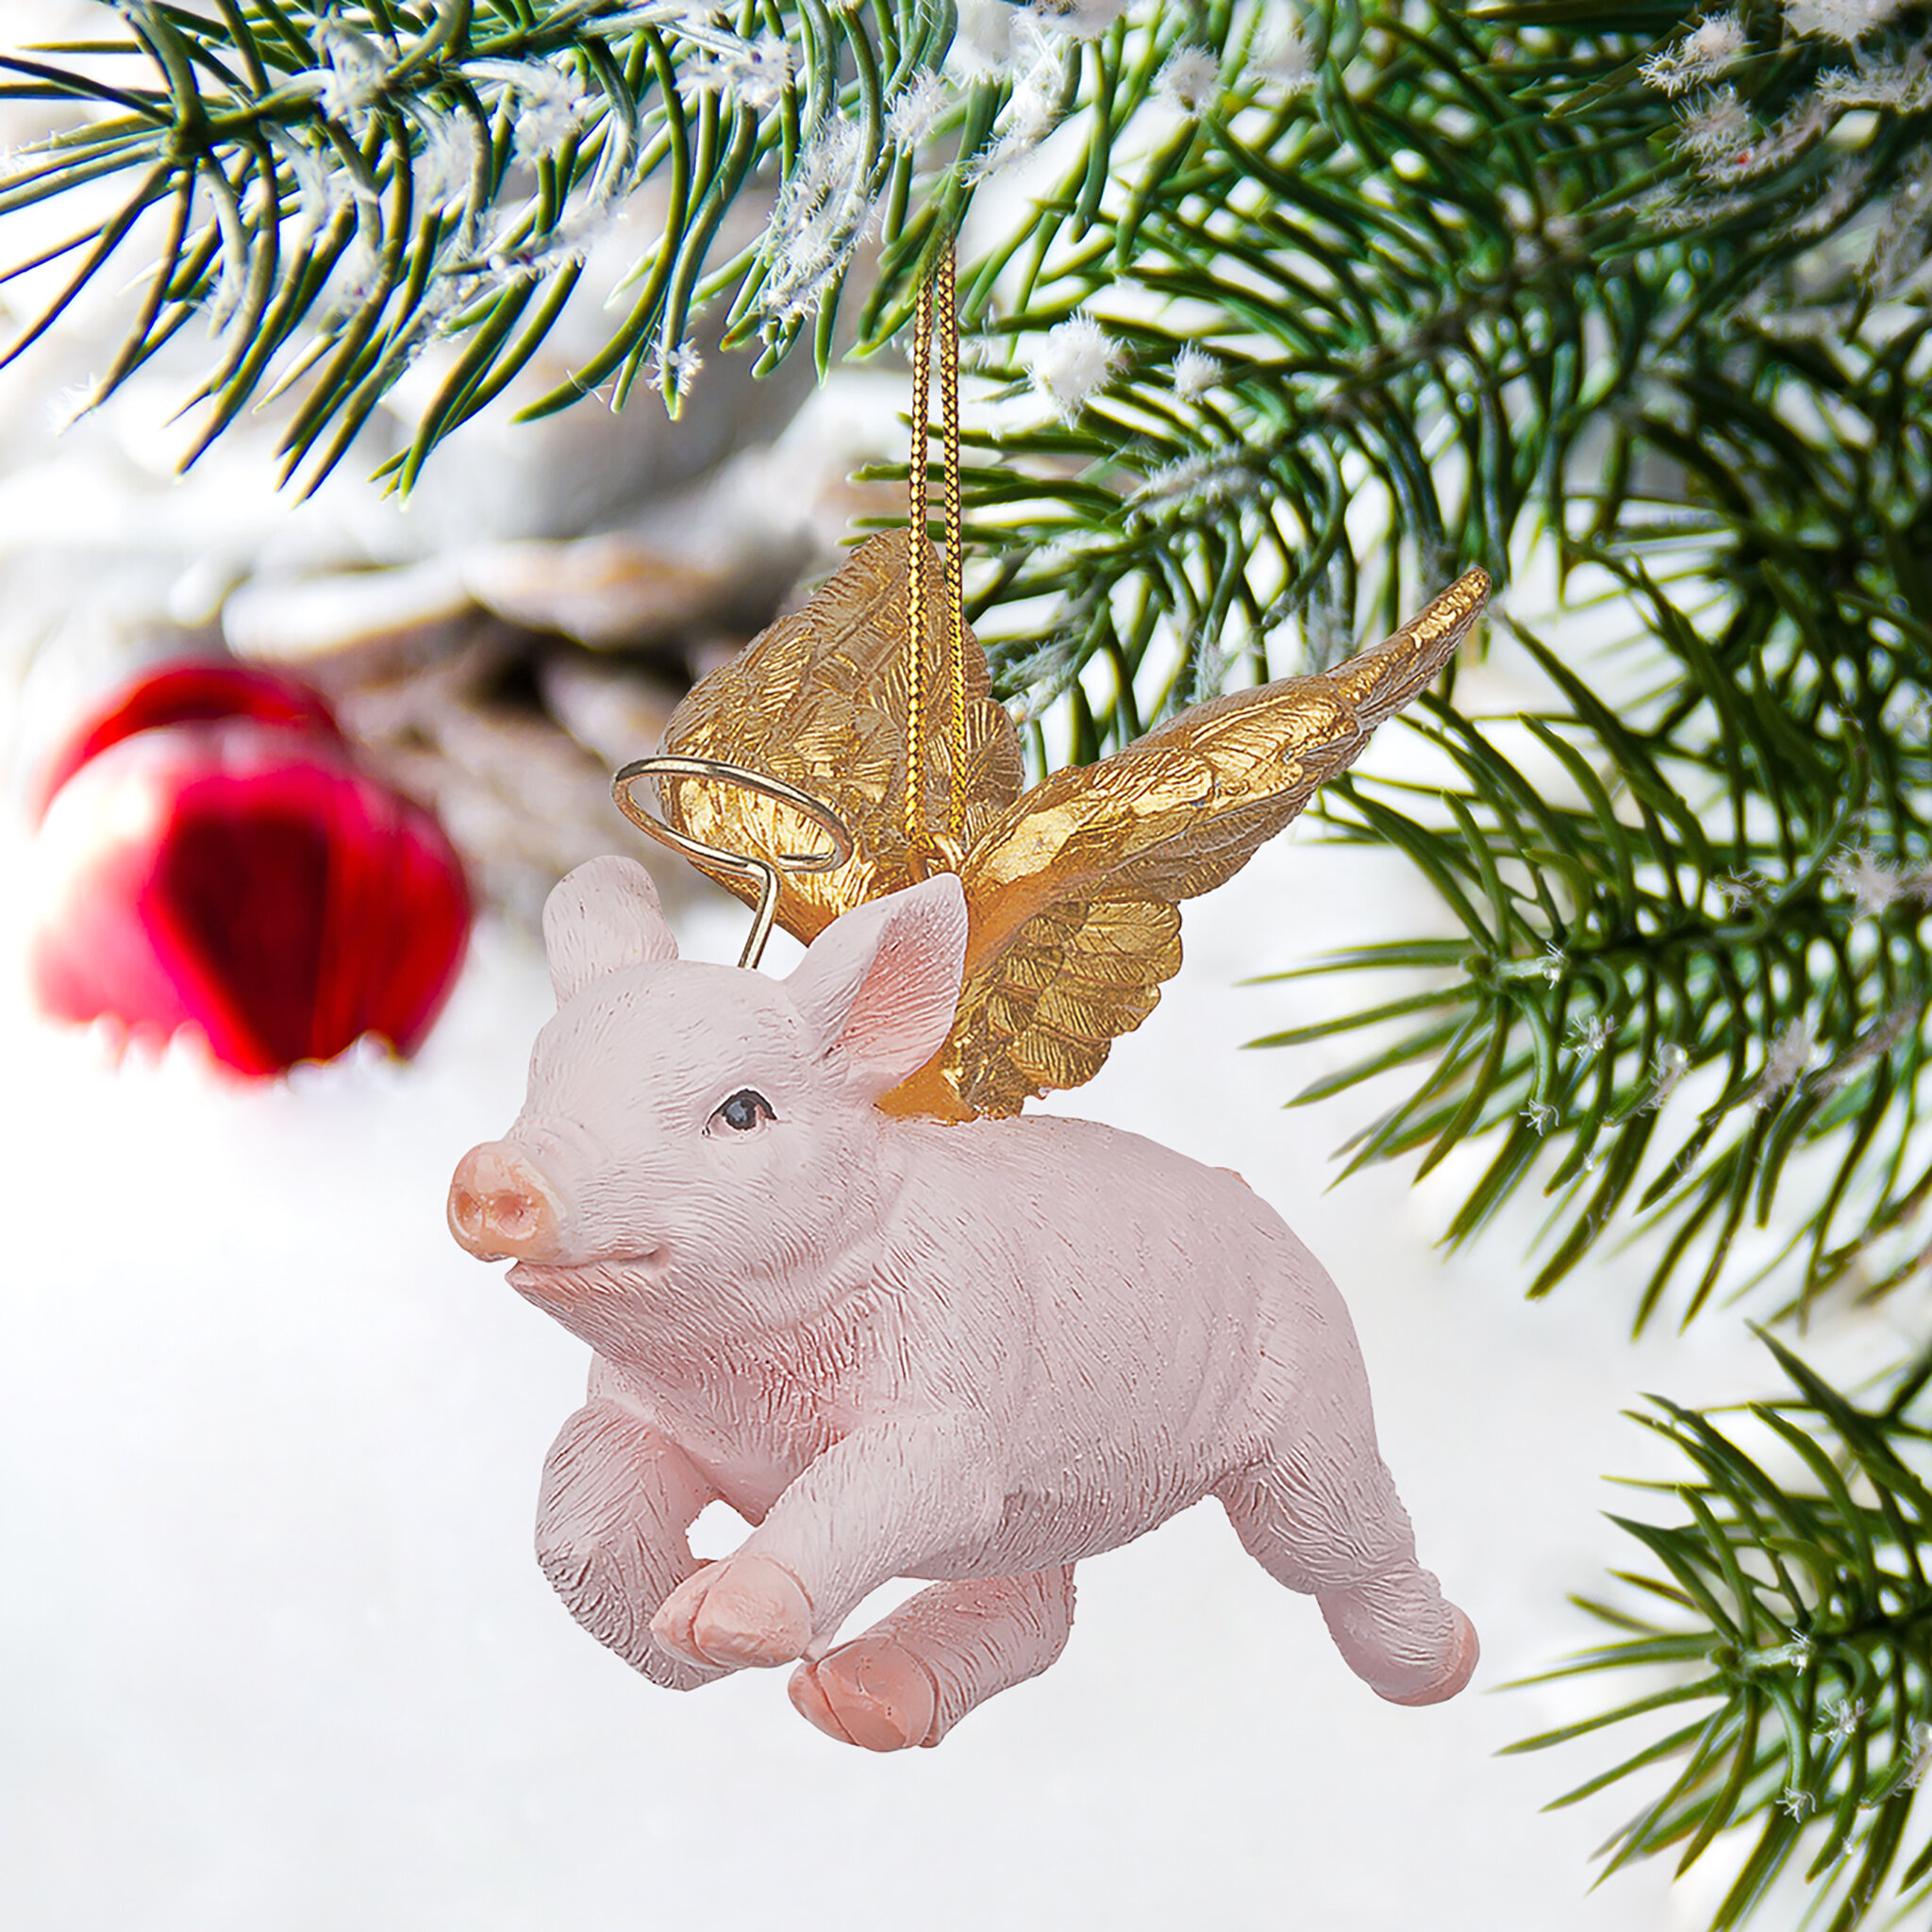 Whimsical Flying Pig with Angel Wings Christmas Holiday Ornament Kurt Adler 